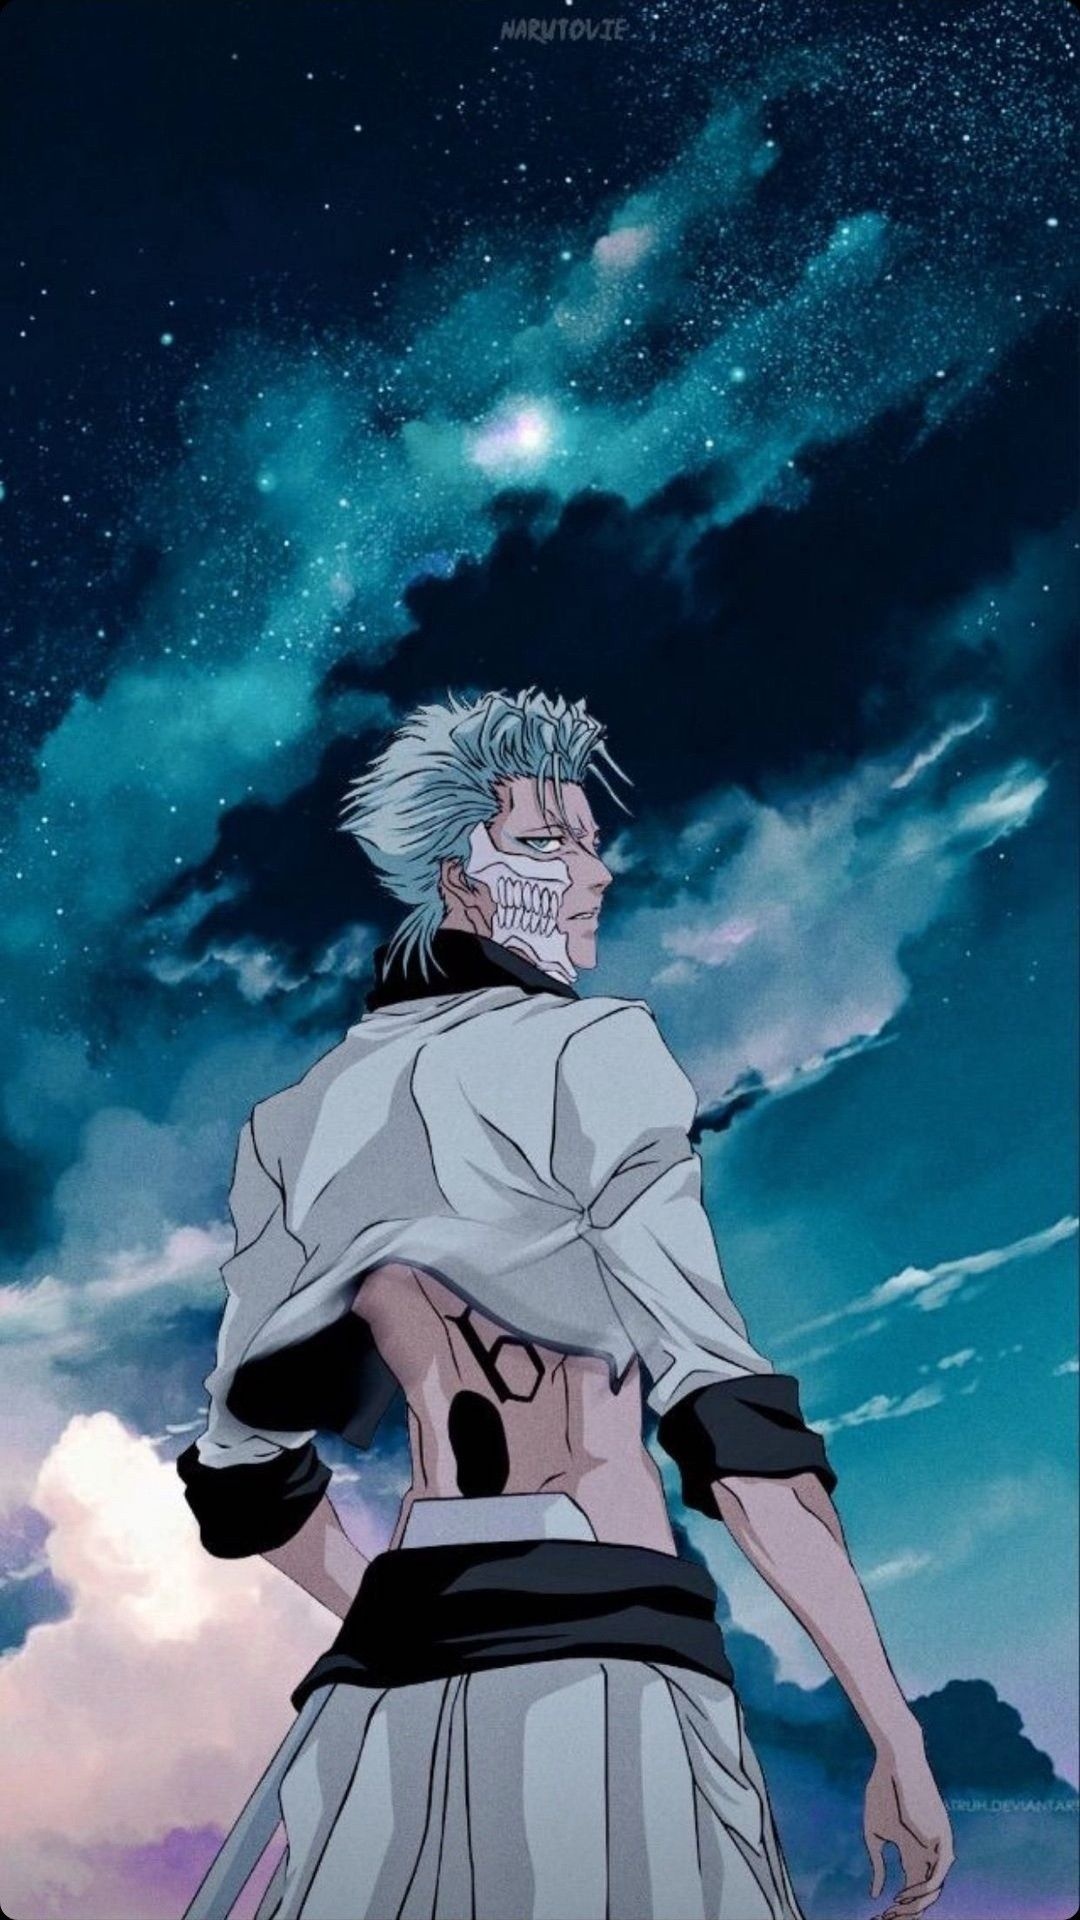 Grimmjow Jaggerjack: The leading villain of the popular Japanese manga series Bleach, Written and illustrated by Tite Kubo. 1080x1920 Full HD Wallpaper.